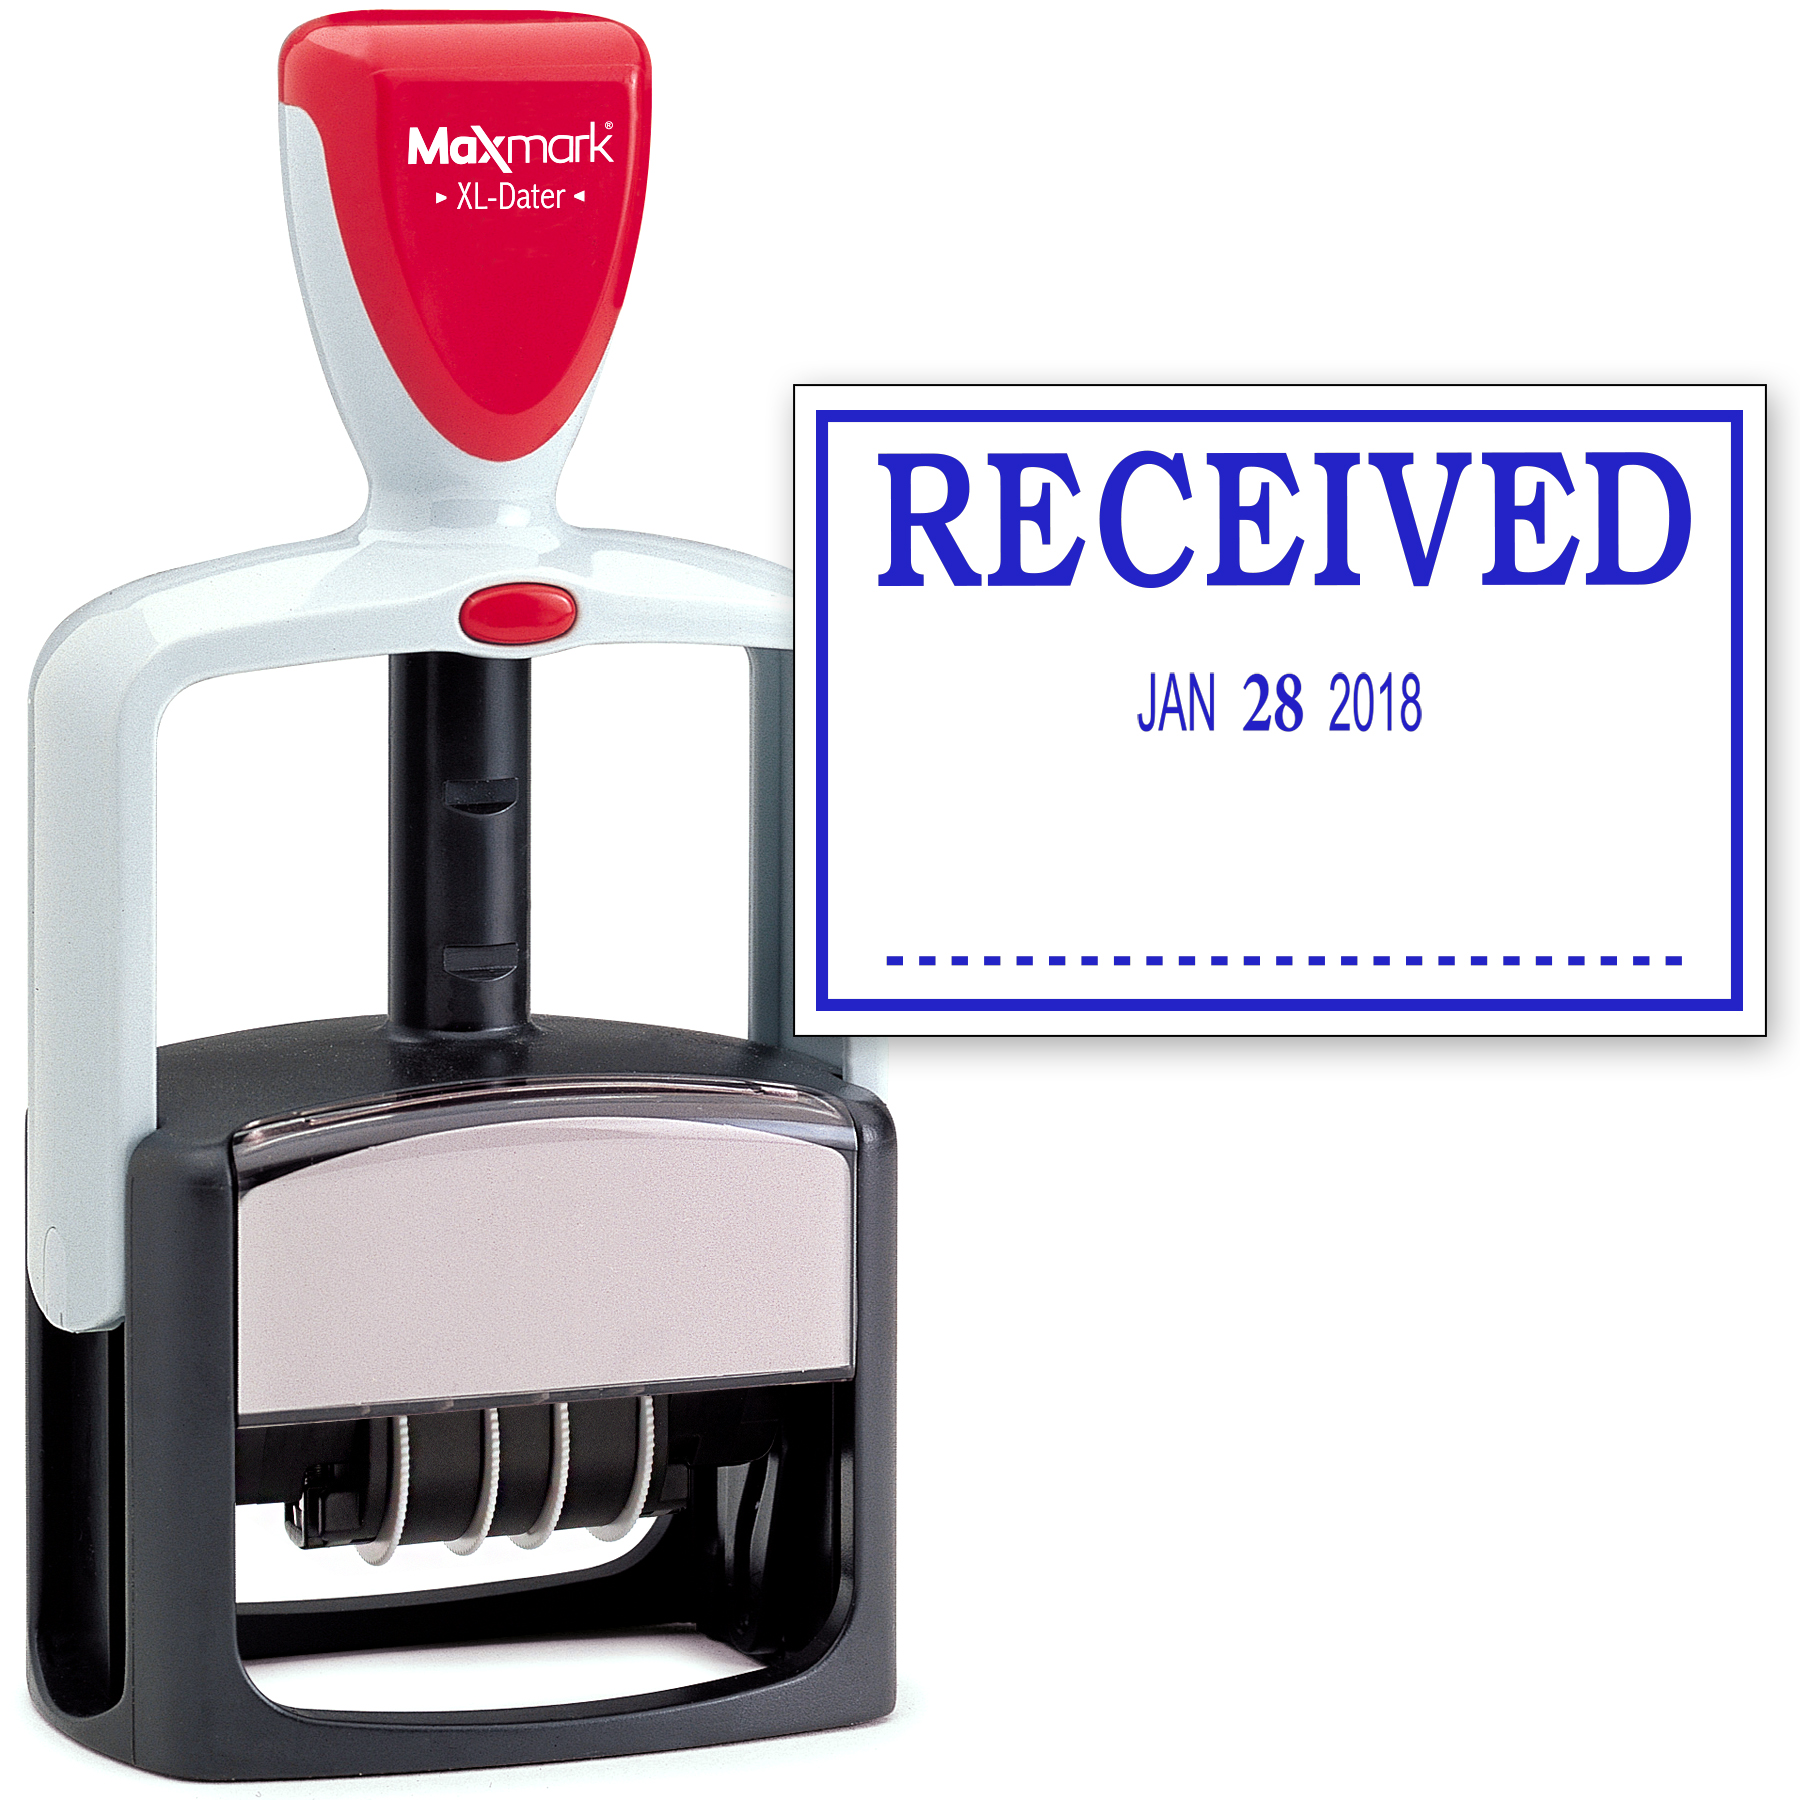 2000 PLUS Heavy Duty Style 2-Color Date Stamp with RECEIVED self inking stamp - Blue Ink